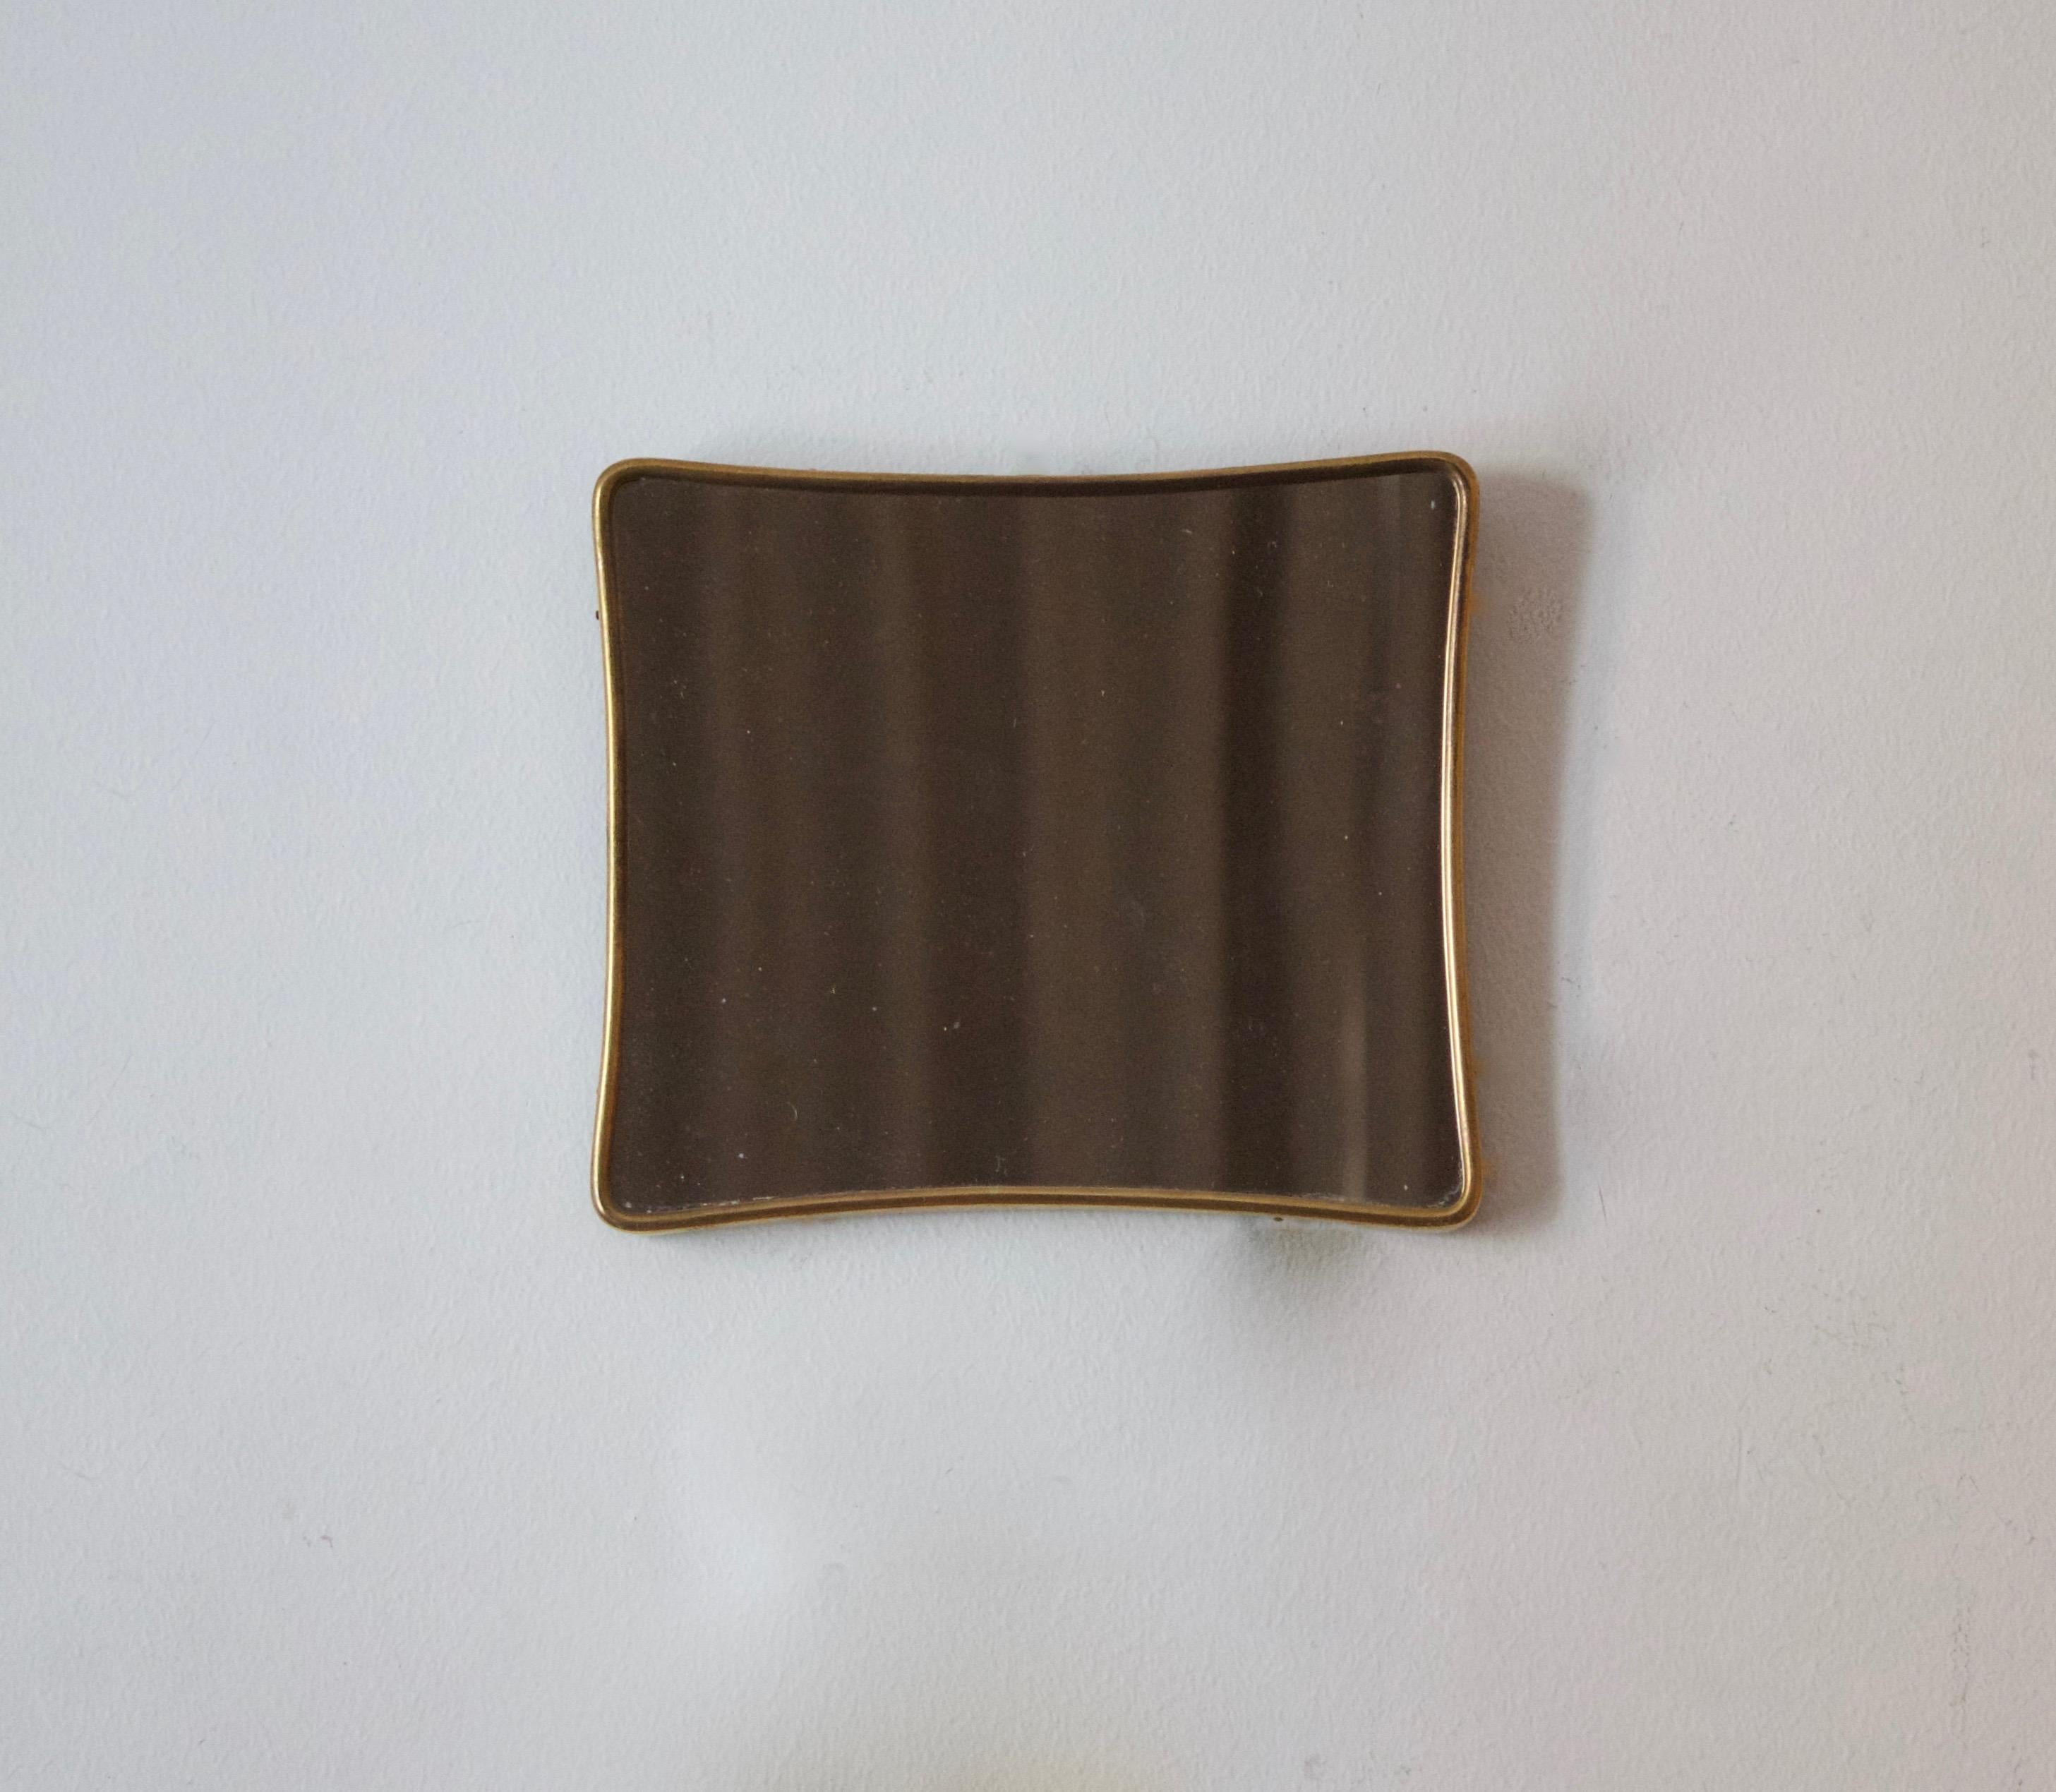 A very small wall mirror, produced in Italy, 1960s. Cut mirror glass is framed in brass frame.

Other designers of the period include Gio Ponti, Fontana Arte, Paolo Buffa, Franco Albini, and Jean Royere.